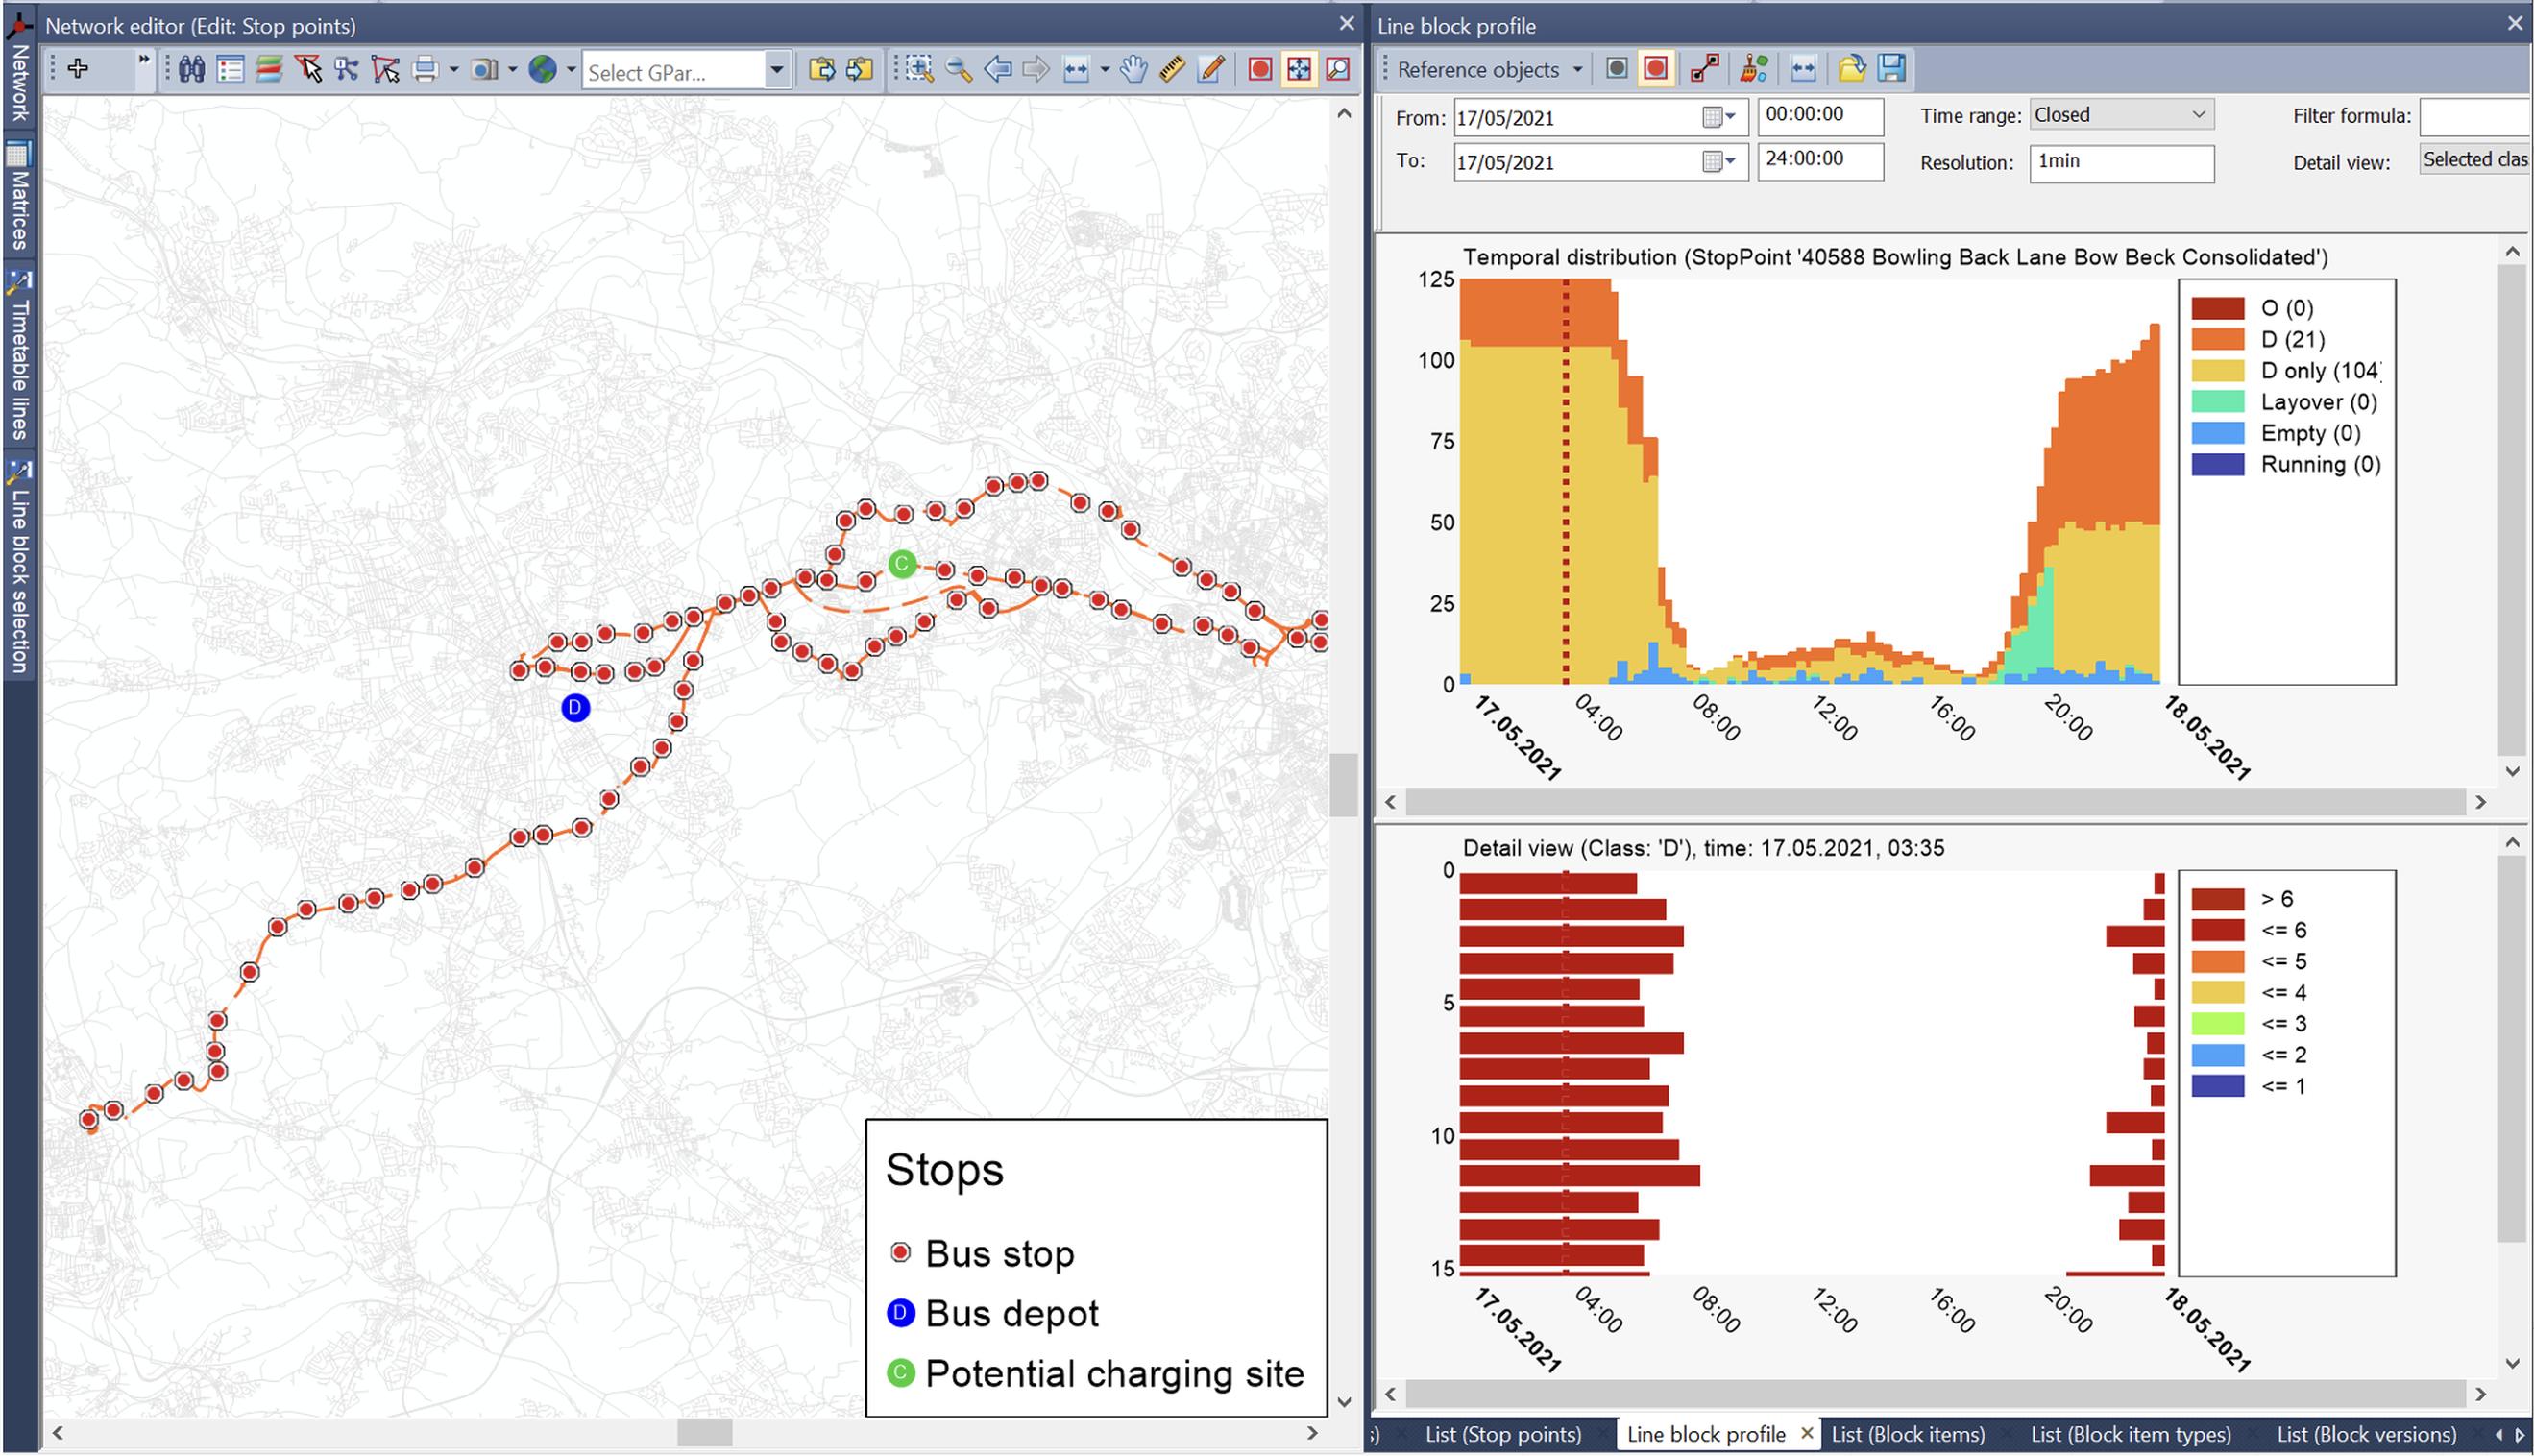 Output from transport modelling software showing bus services, potential charging locations, and the calculated charging profile at the bus depot